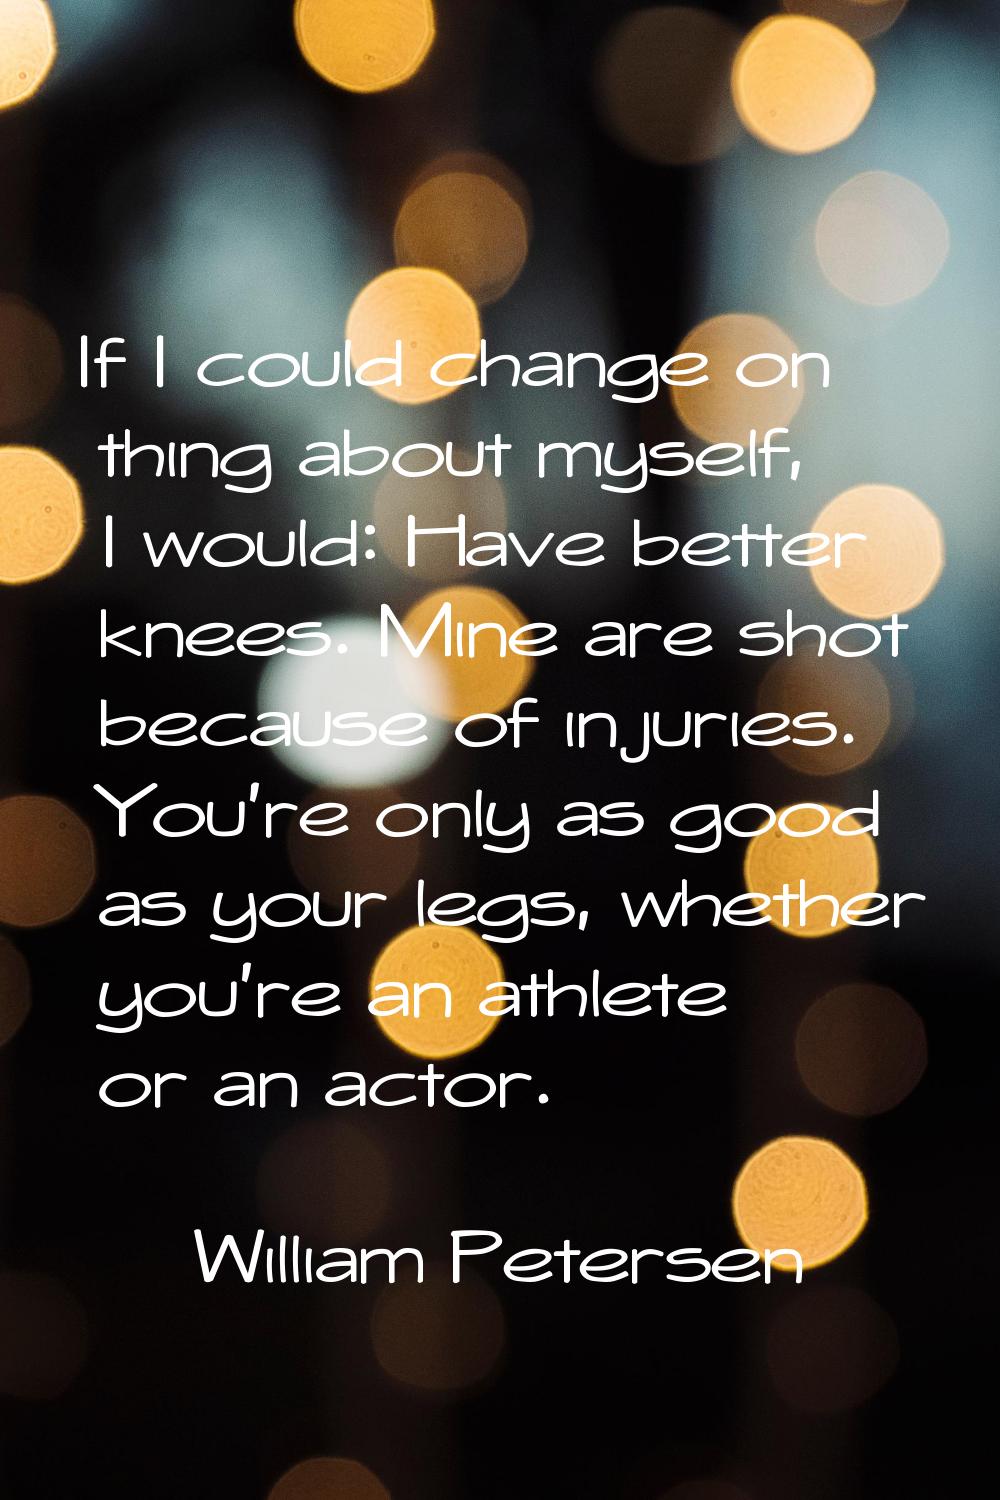 If I could change on thing about myself, I would: Have better knees. Mine are shot because of injur